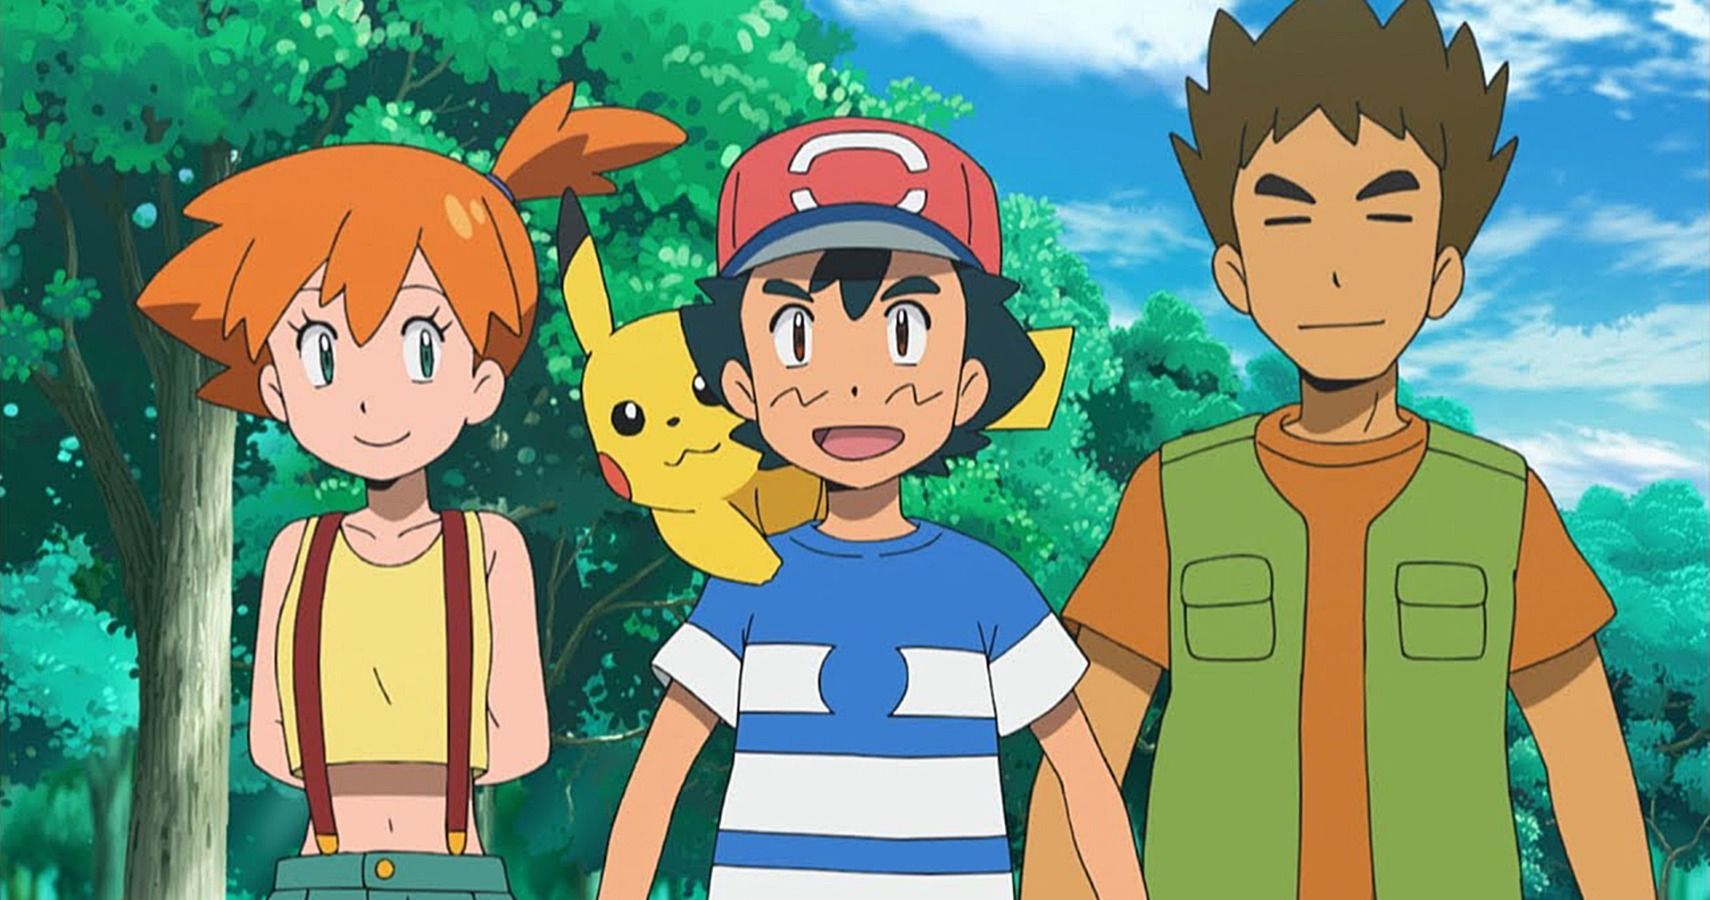 The Best Idea For A New Pokemon Game Comes From This One Episode Of The Anime